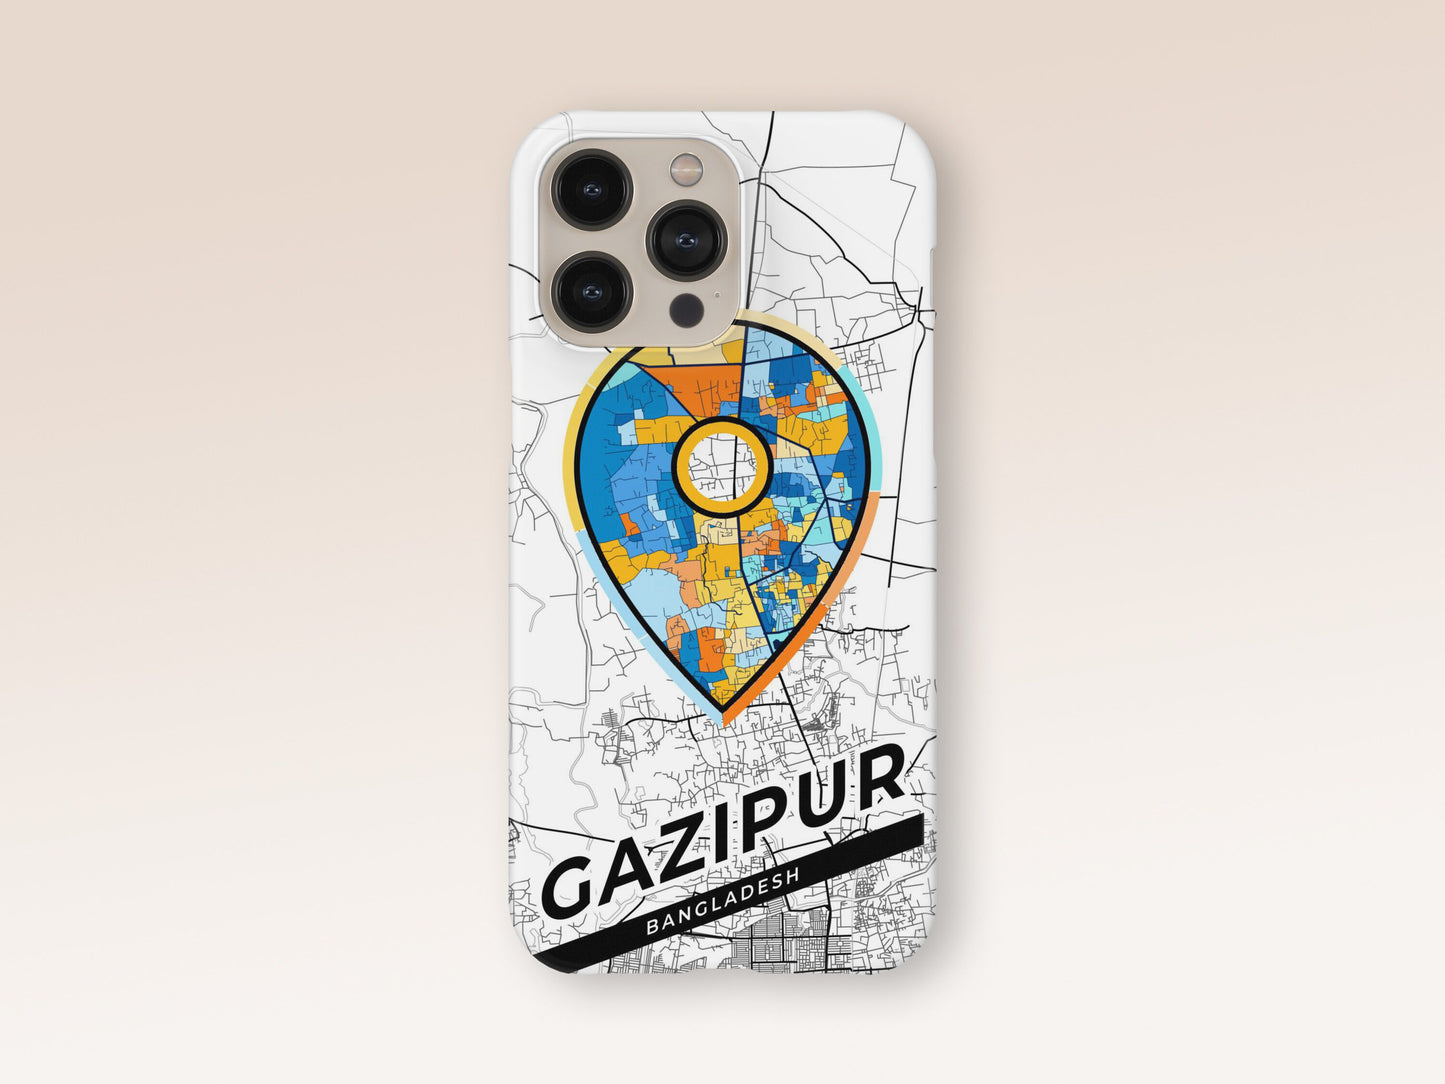 Gazipur Bangladesh slim phone case with colorful icon. Birthday, wedding or housewarming gift. Couple match cases. 1